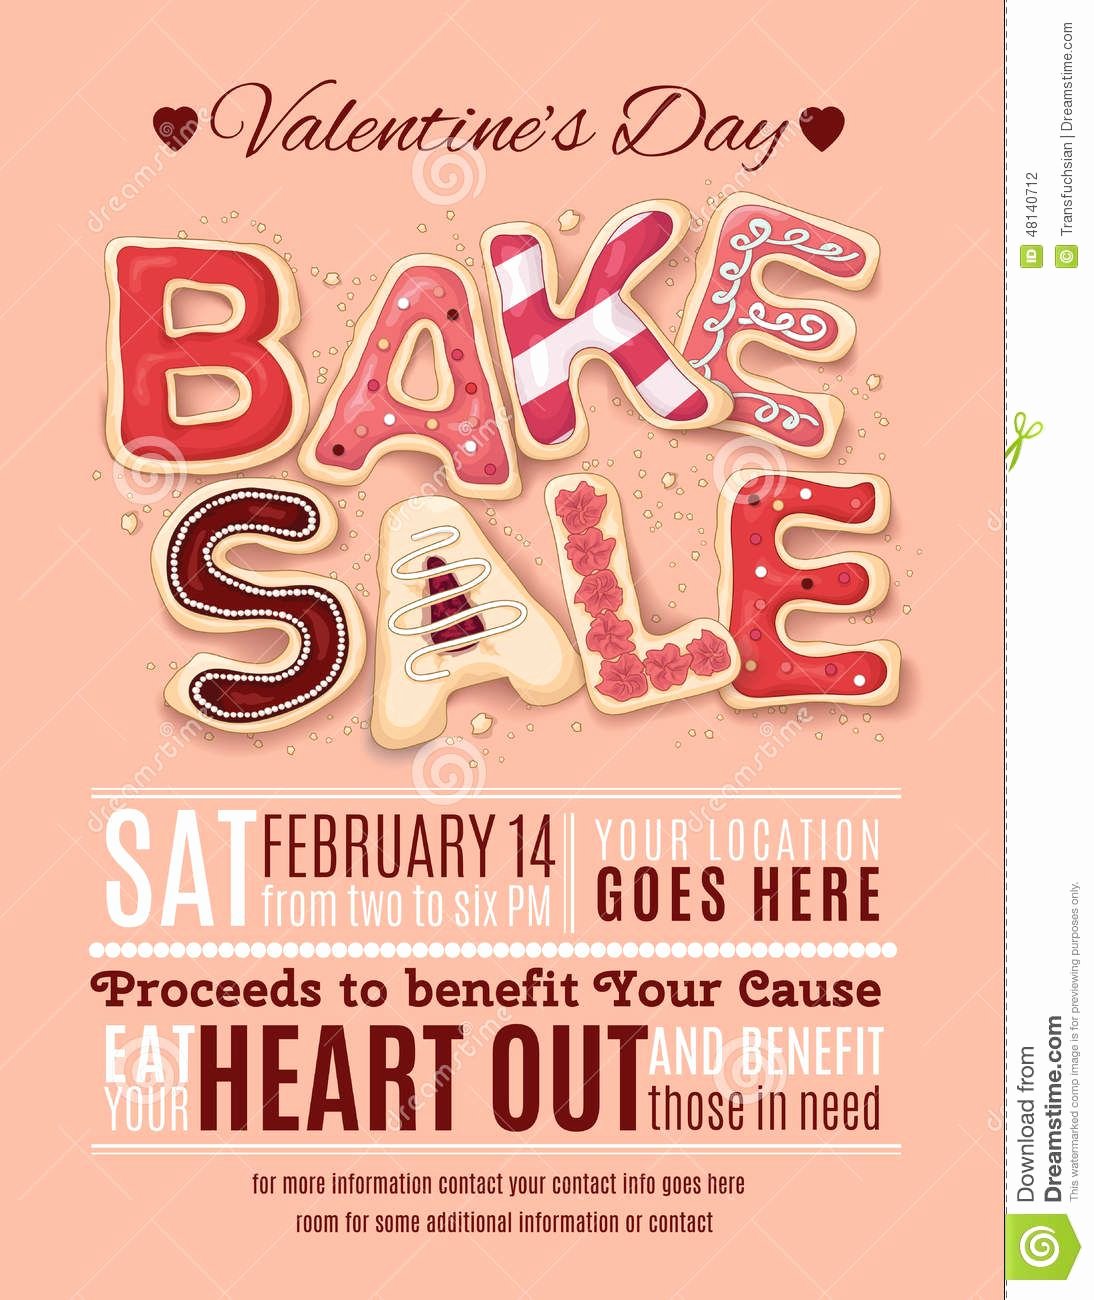 Valentines Day Bake Sale Flyer Template Download From